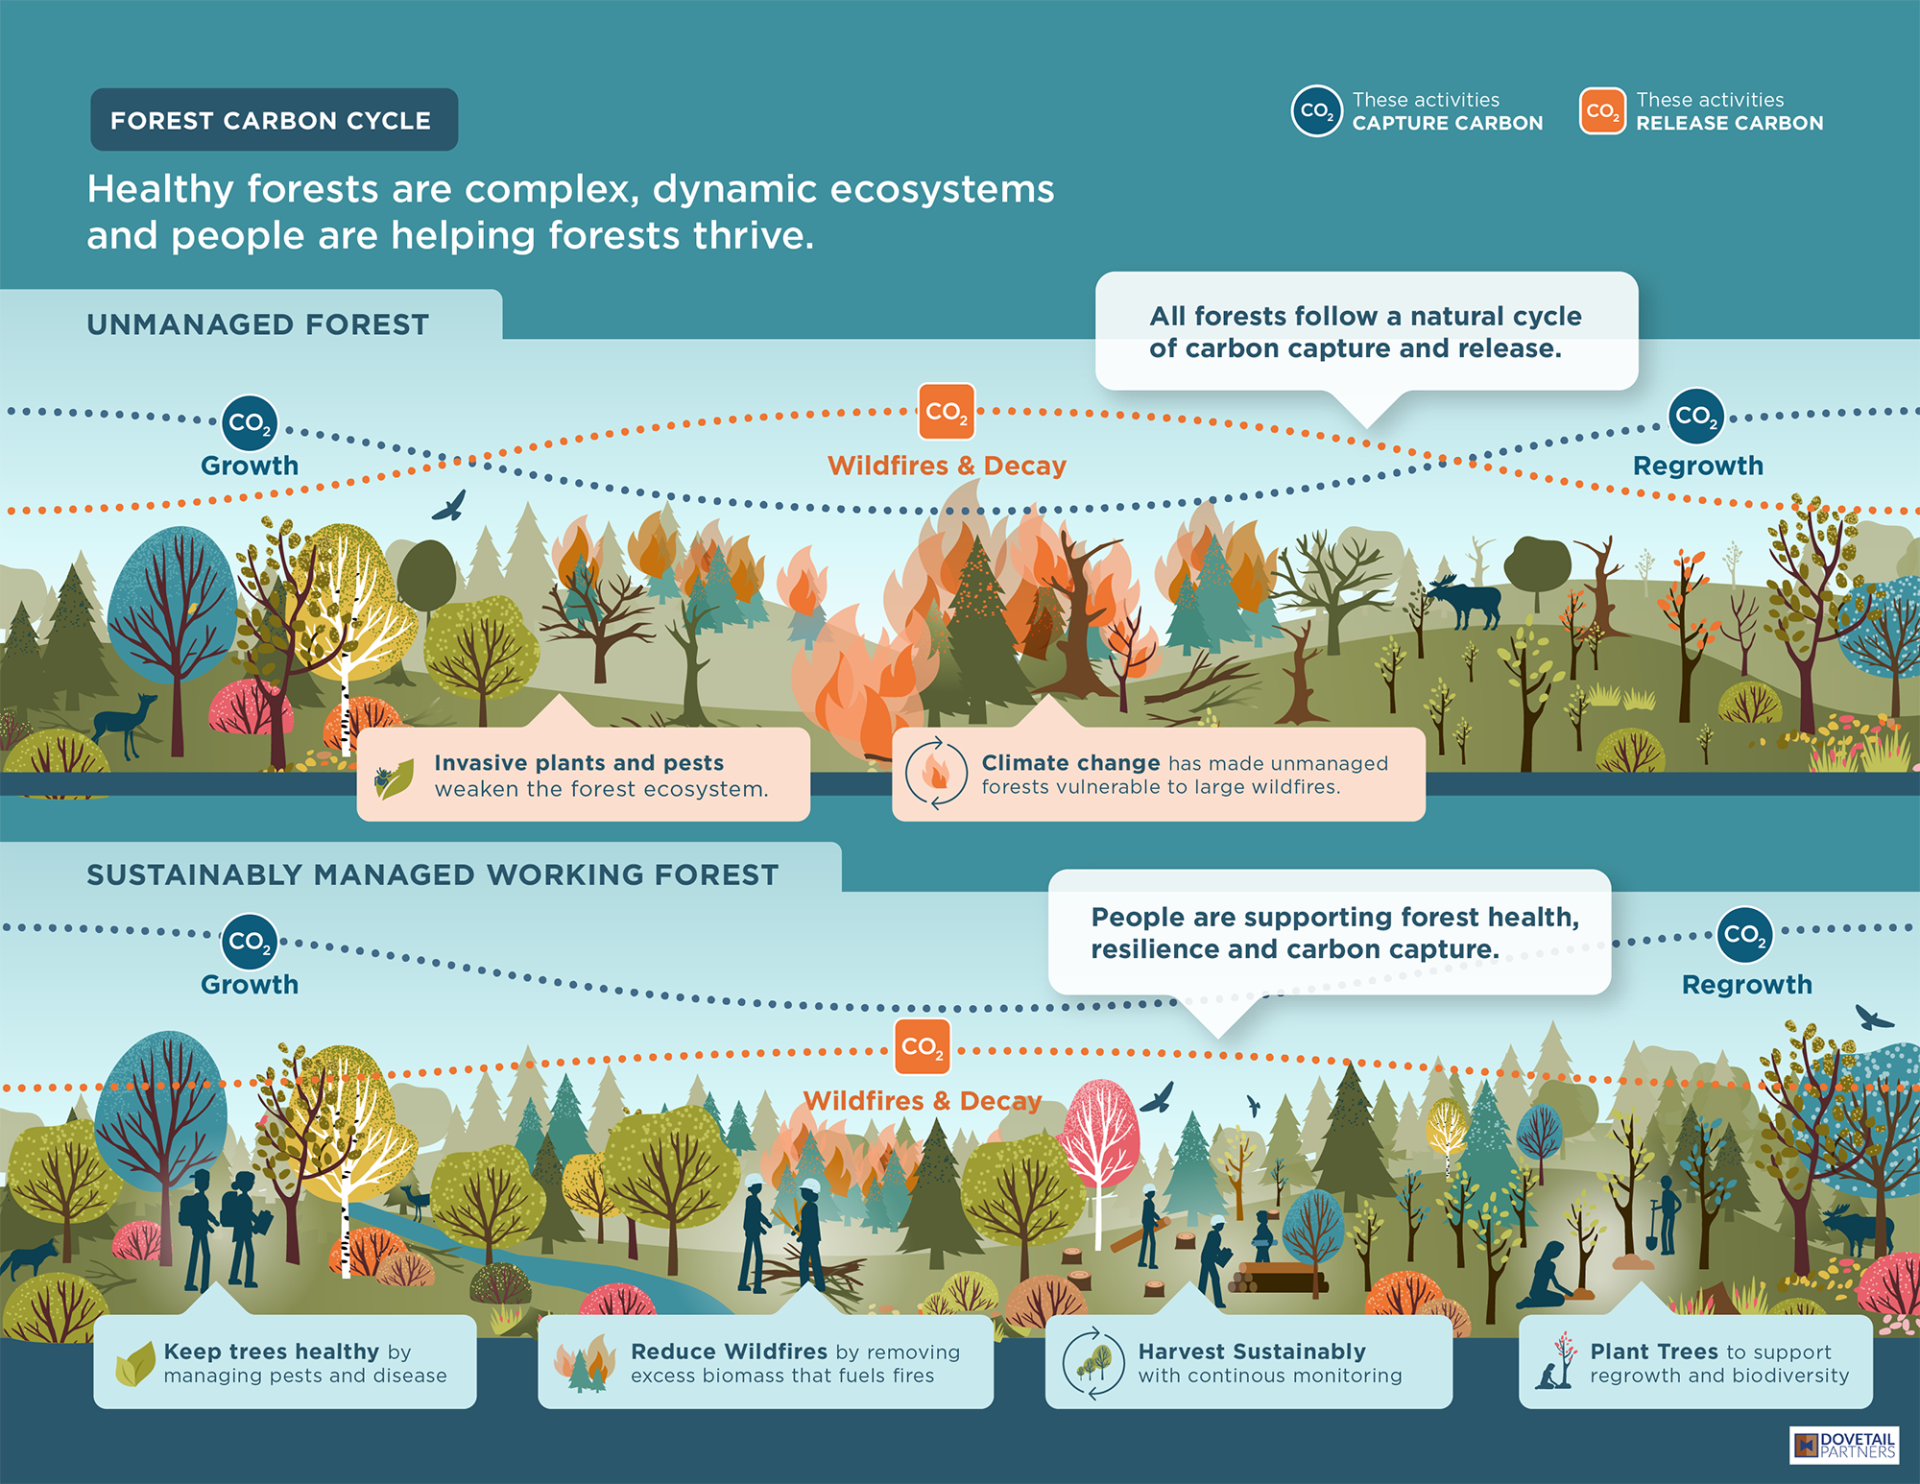 Infographic showing benefits of sustainably managed forests for the forest cycle